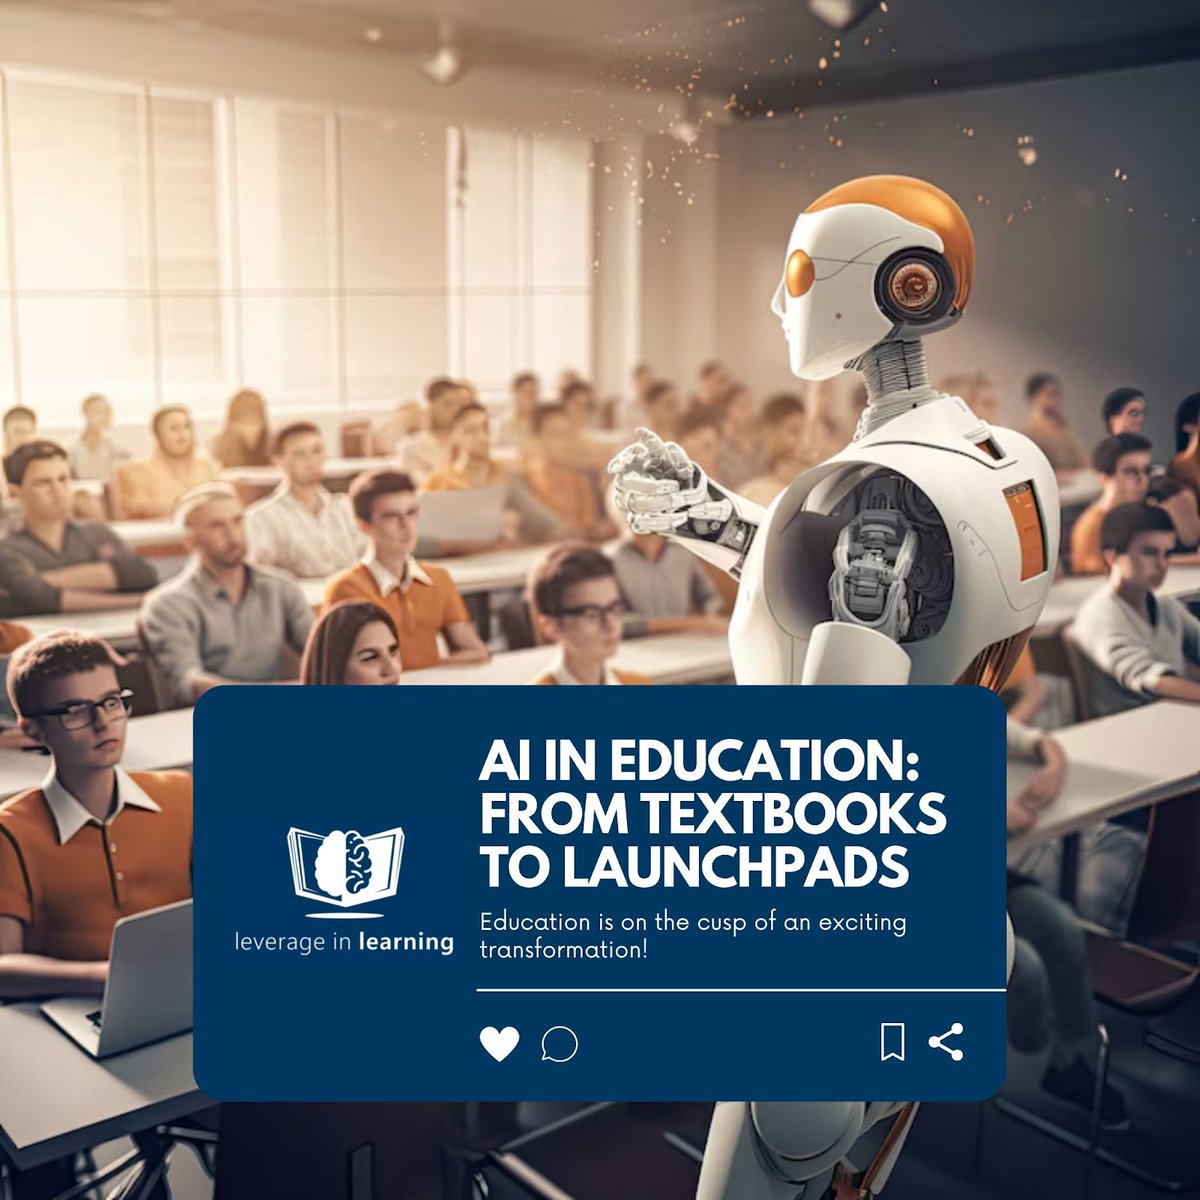 Education is on the cusp of an exciting transformation! Artificial intelligence isn't here to replace teachers, but to become their powerful ally.
----
🌐 leverageinlearning.com
.
#CognitiveDisabilities #LearningRevolution #EducationTechnology #Accessibility #EquityinEducation